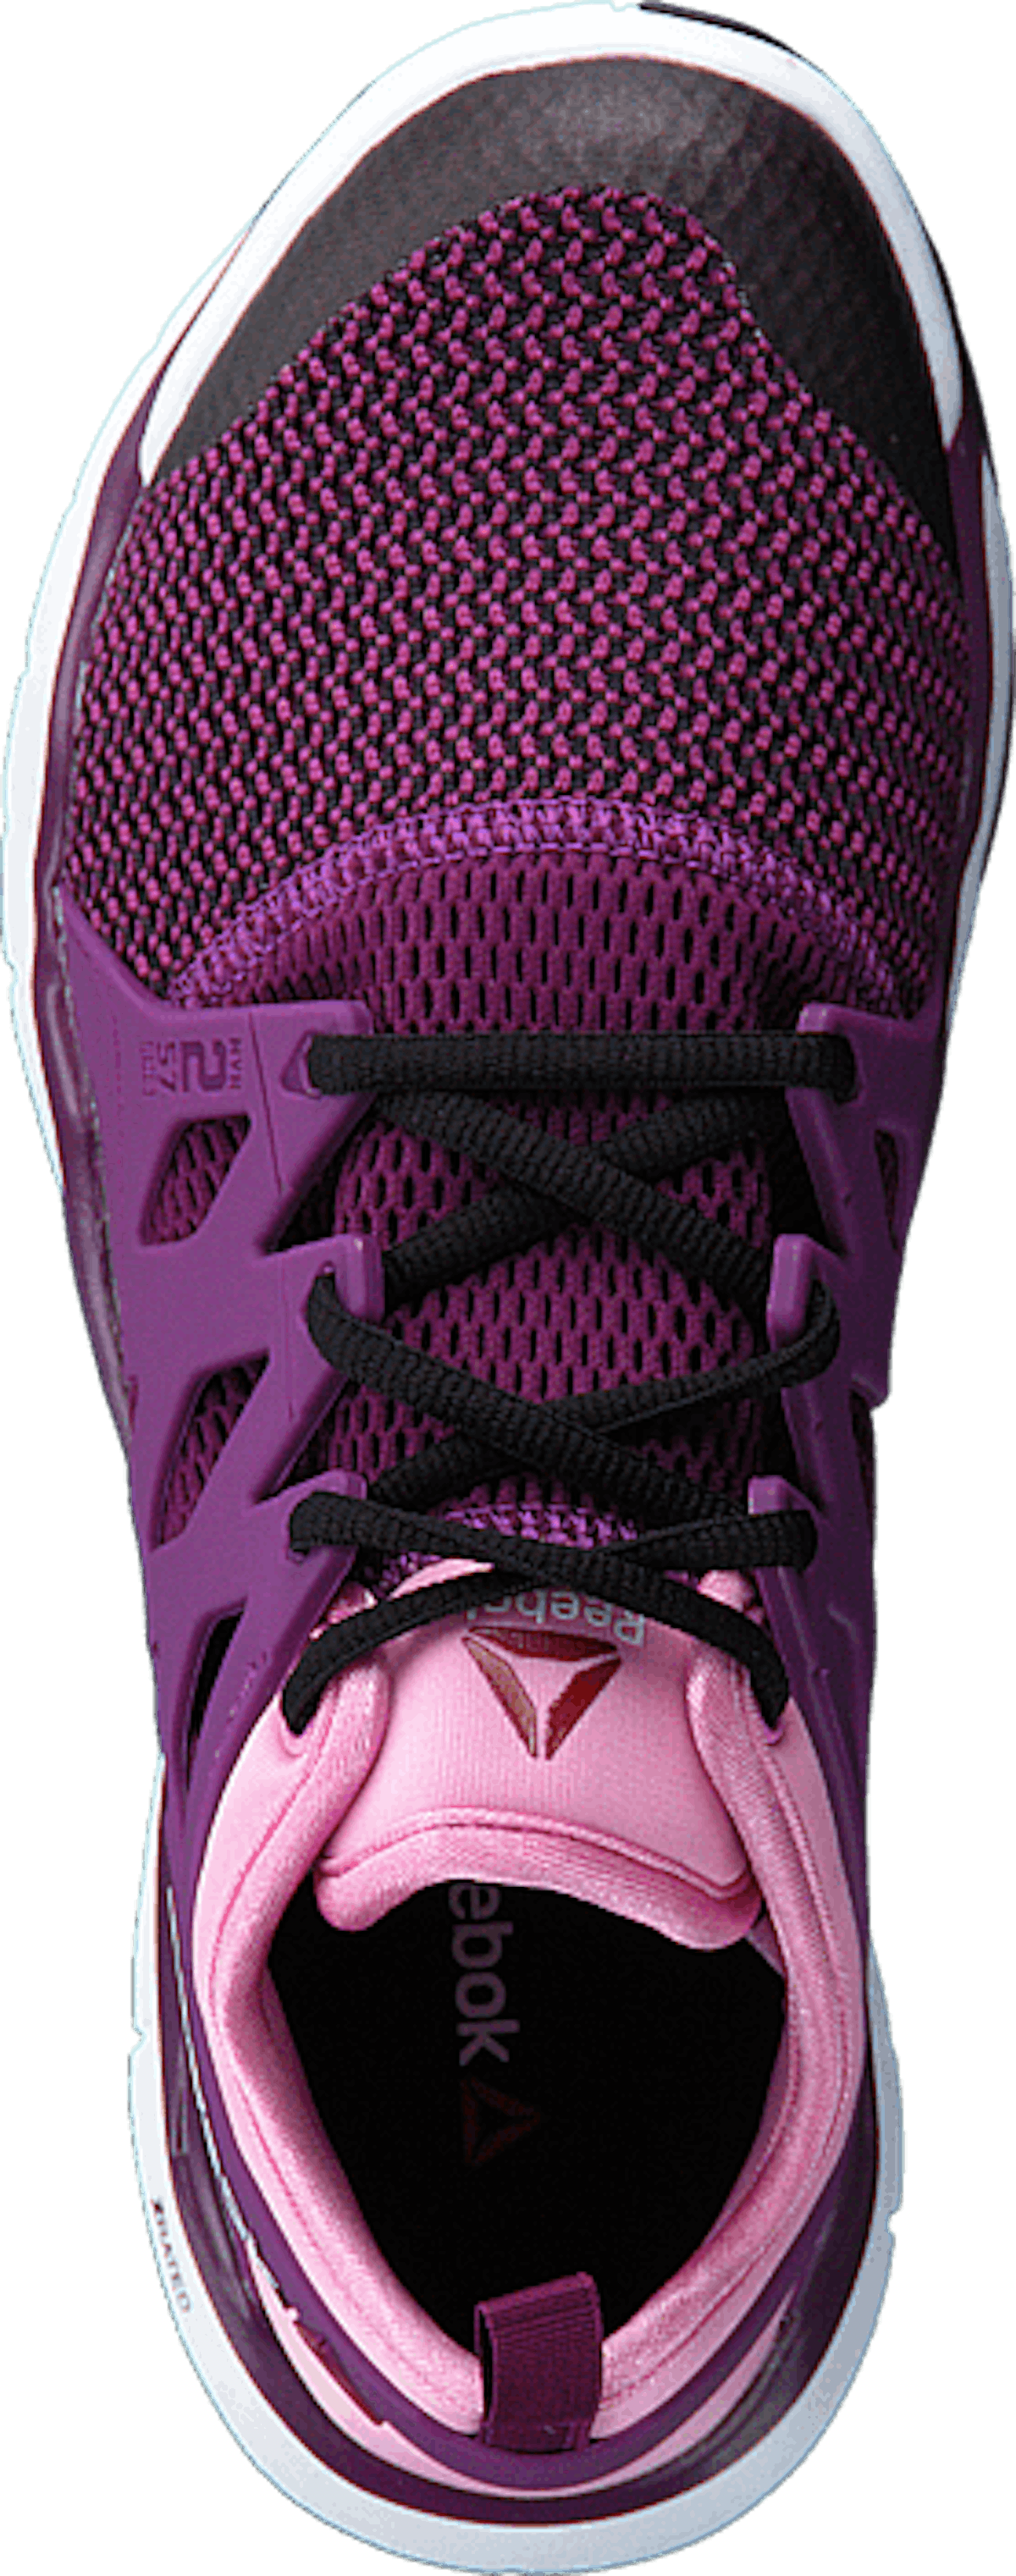 Reebok Zcut Tr 3.0 Celestial Orchid/Black/Pink